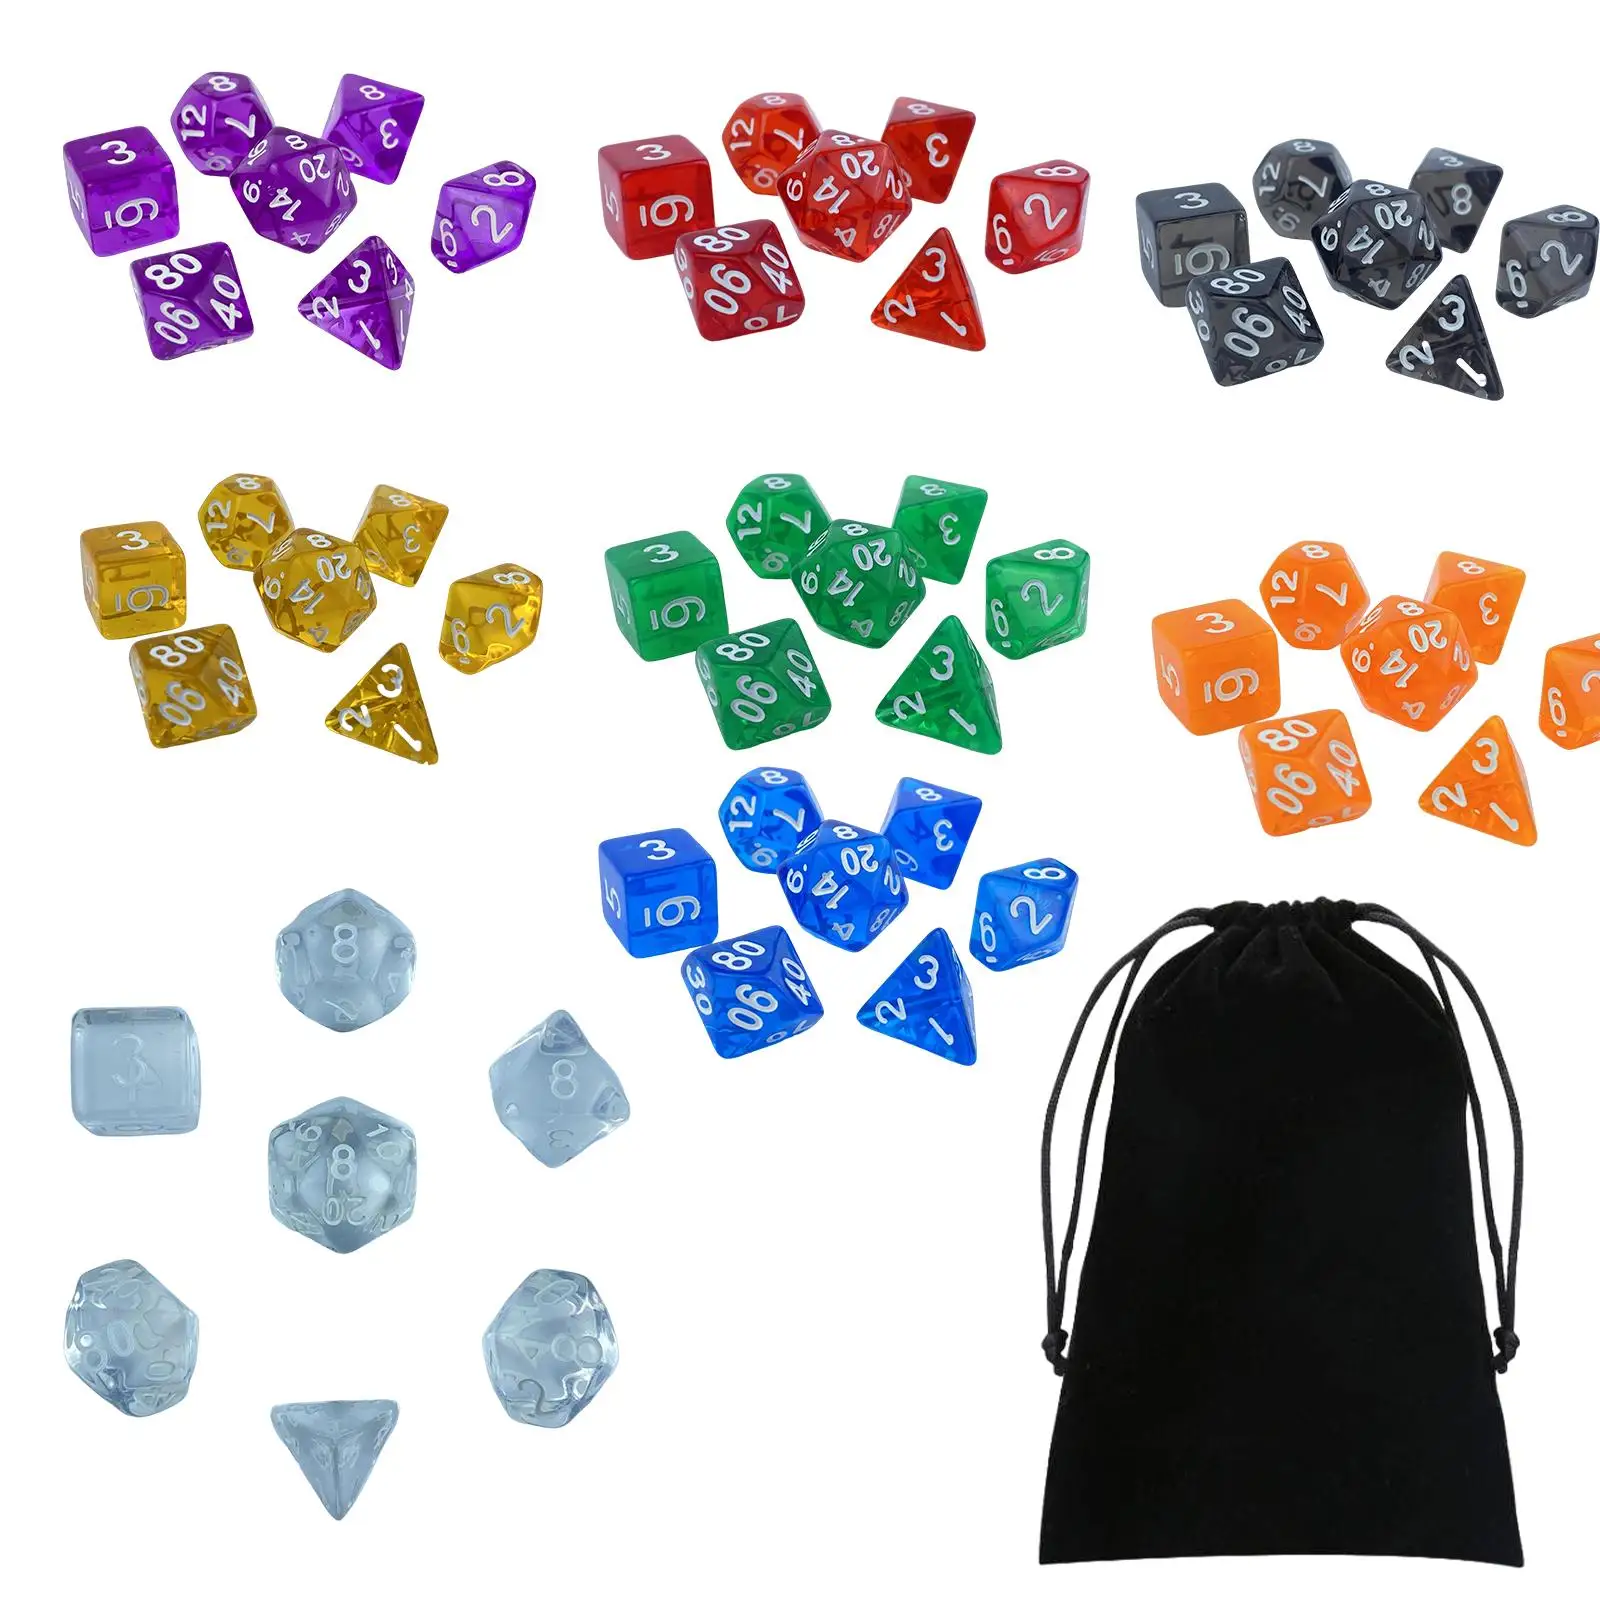 Polyhedral Dice, Multi Sided Dice Set 56pcs Polyhedral RPG Game Dices, Purple, Red, Black, Yellow, Green, Orange, Blue, Silver